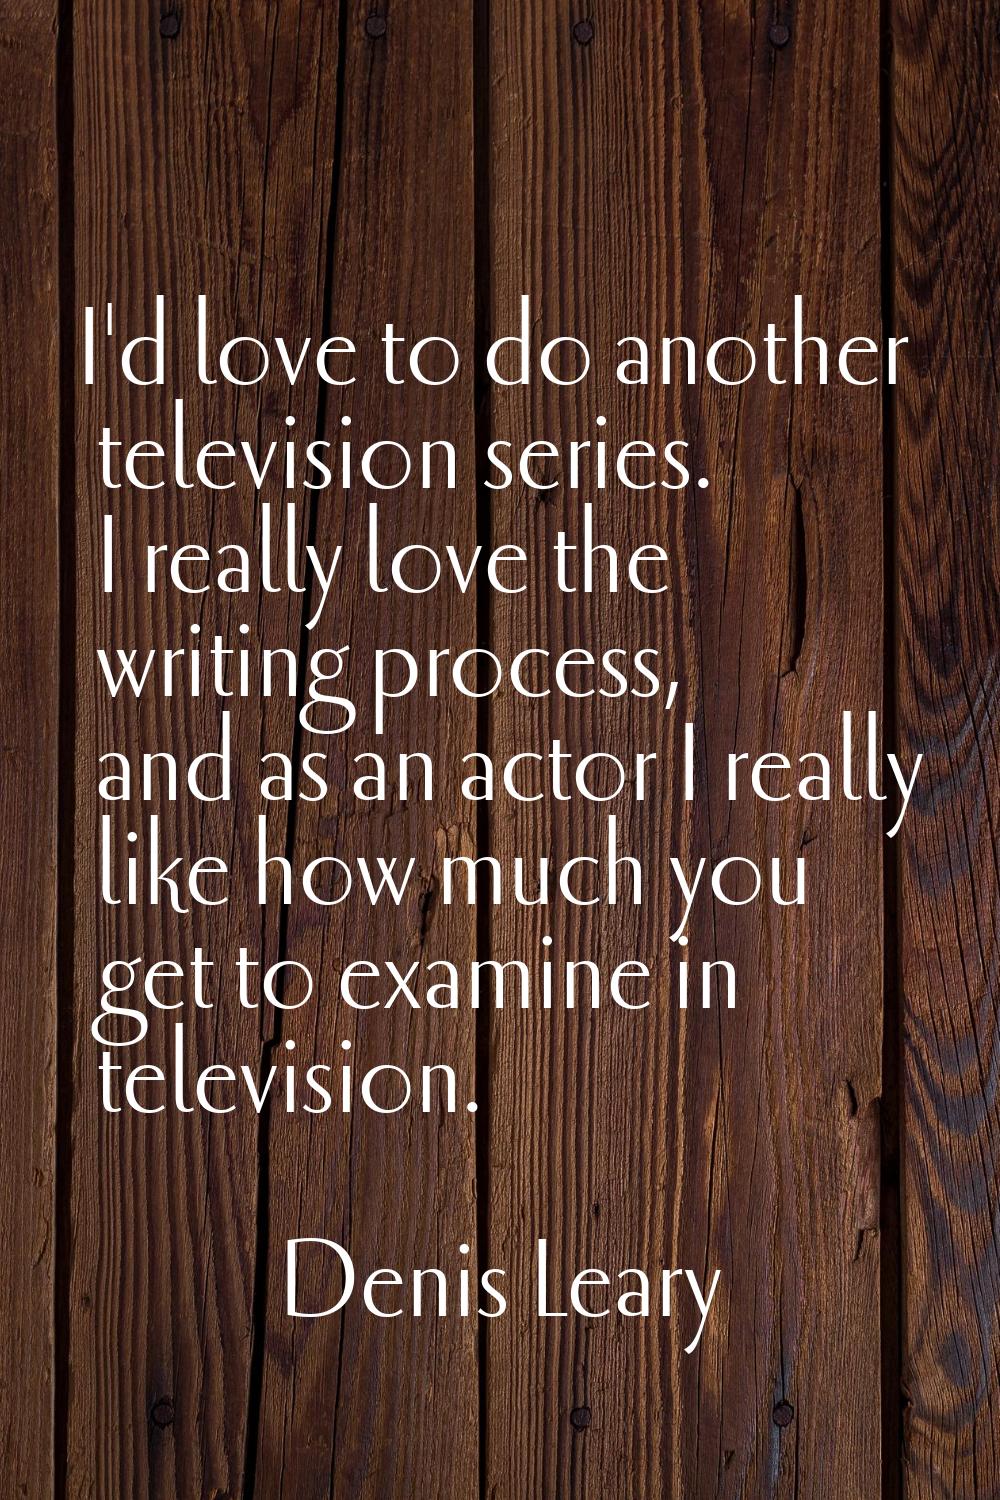 I'd love to do another television series. I really love the writing process, and as an actor I real